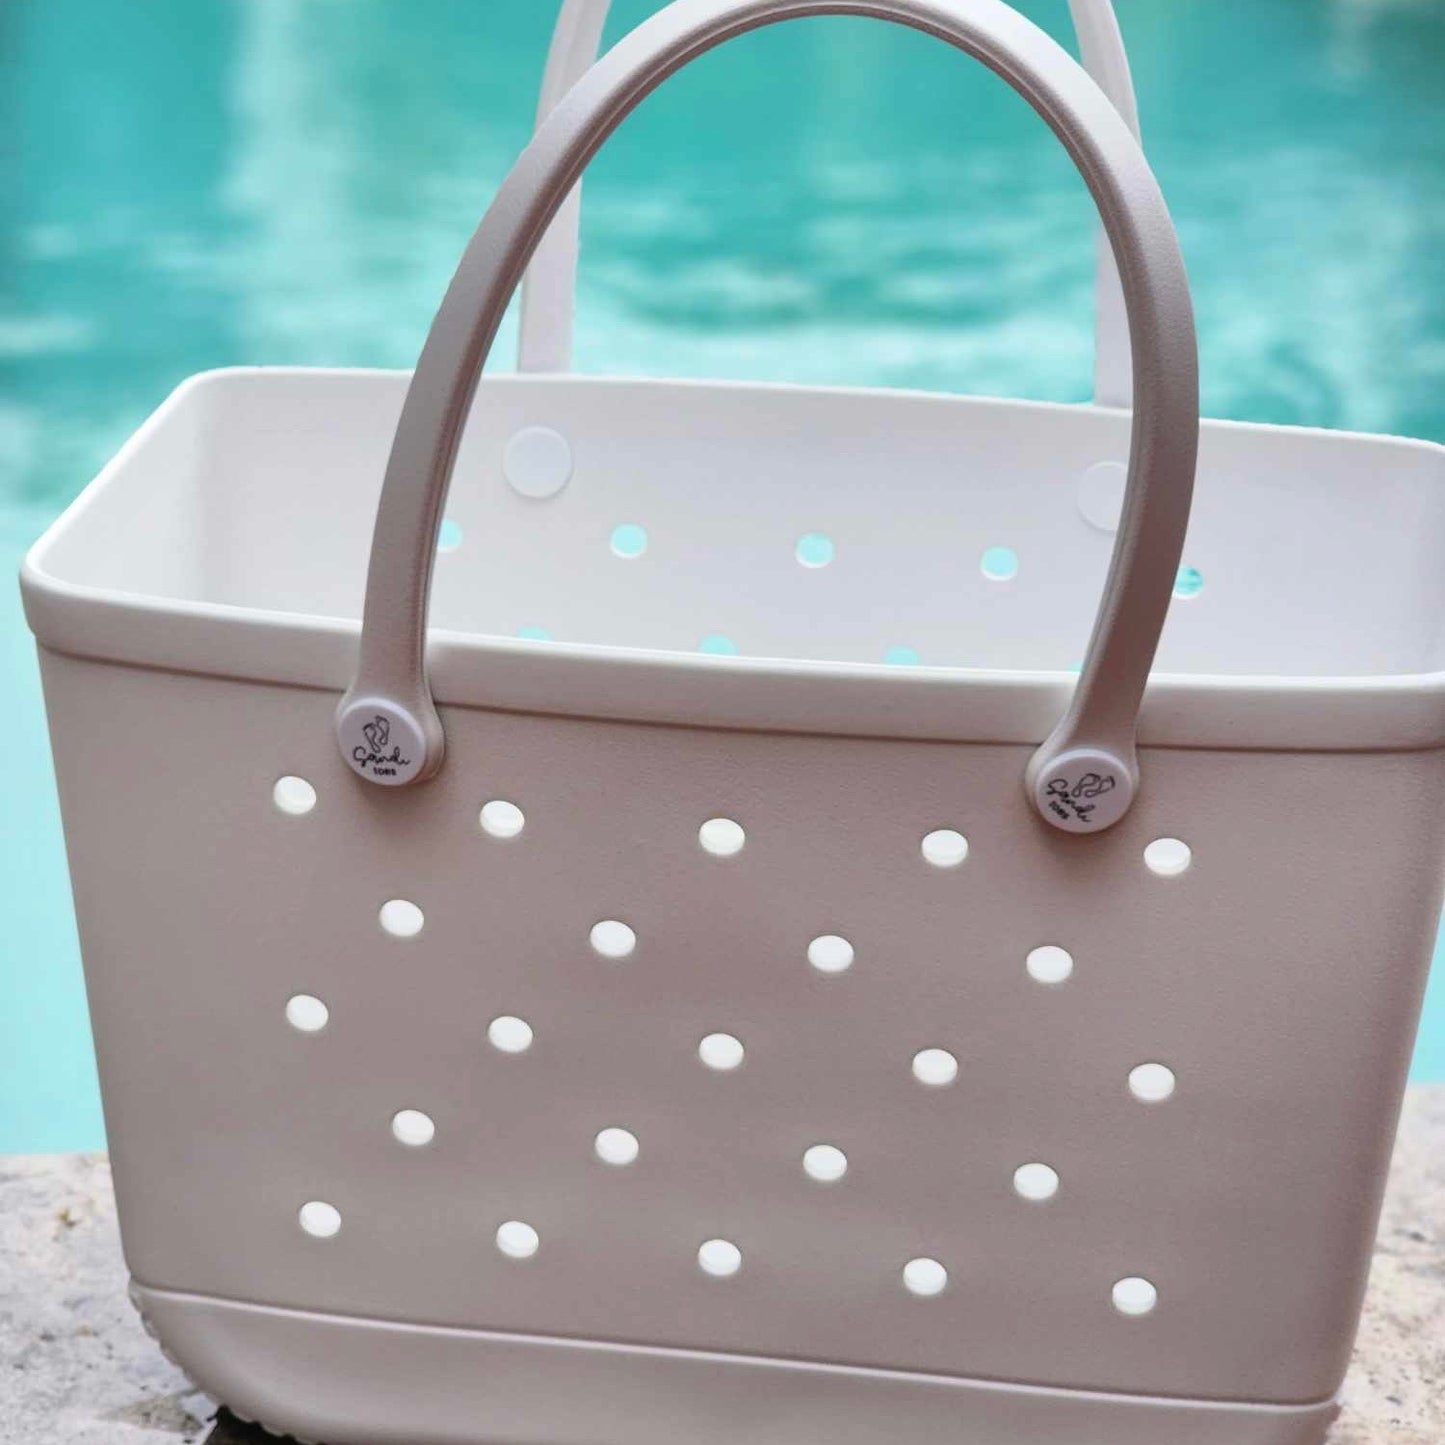 White Haven Silicone Bag (Sandi Toes): Poolside Essentials in Style. [White silicone bag with the Sandi Toes logo rests beside a sparkling pool, perfect for keeping your swim essentials organised.]